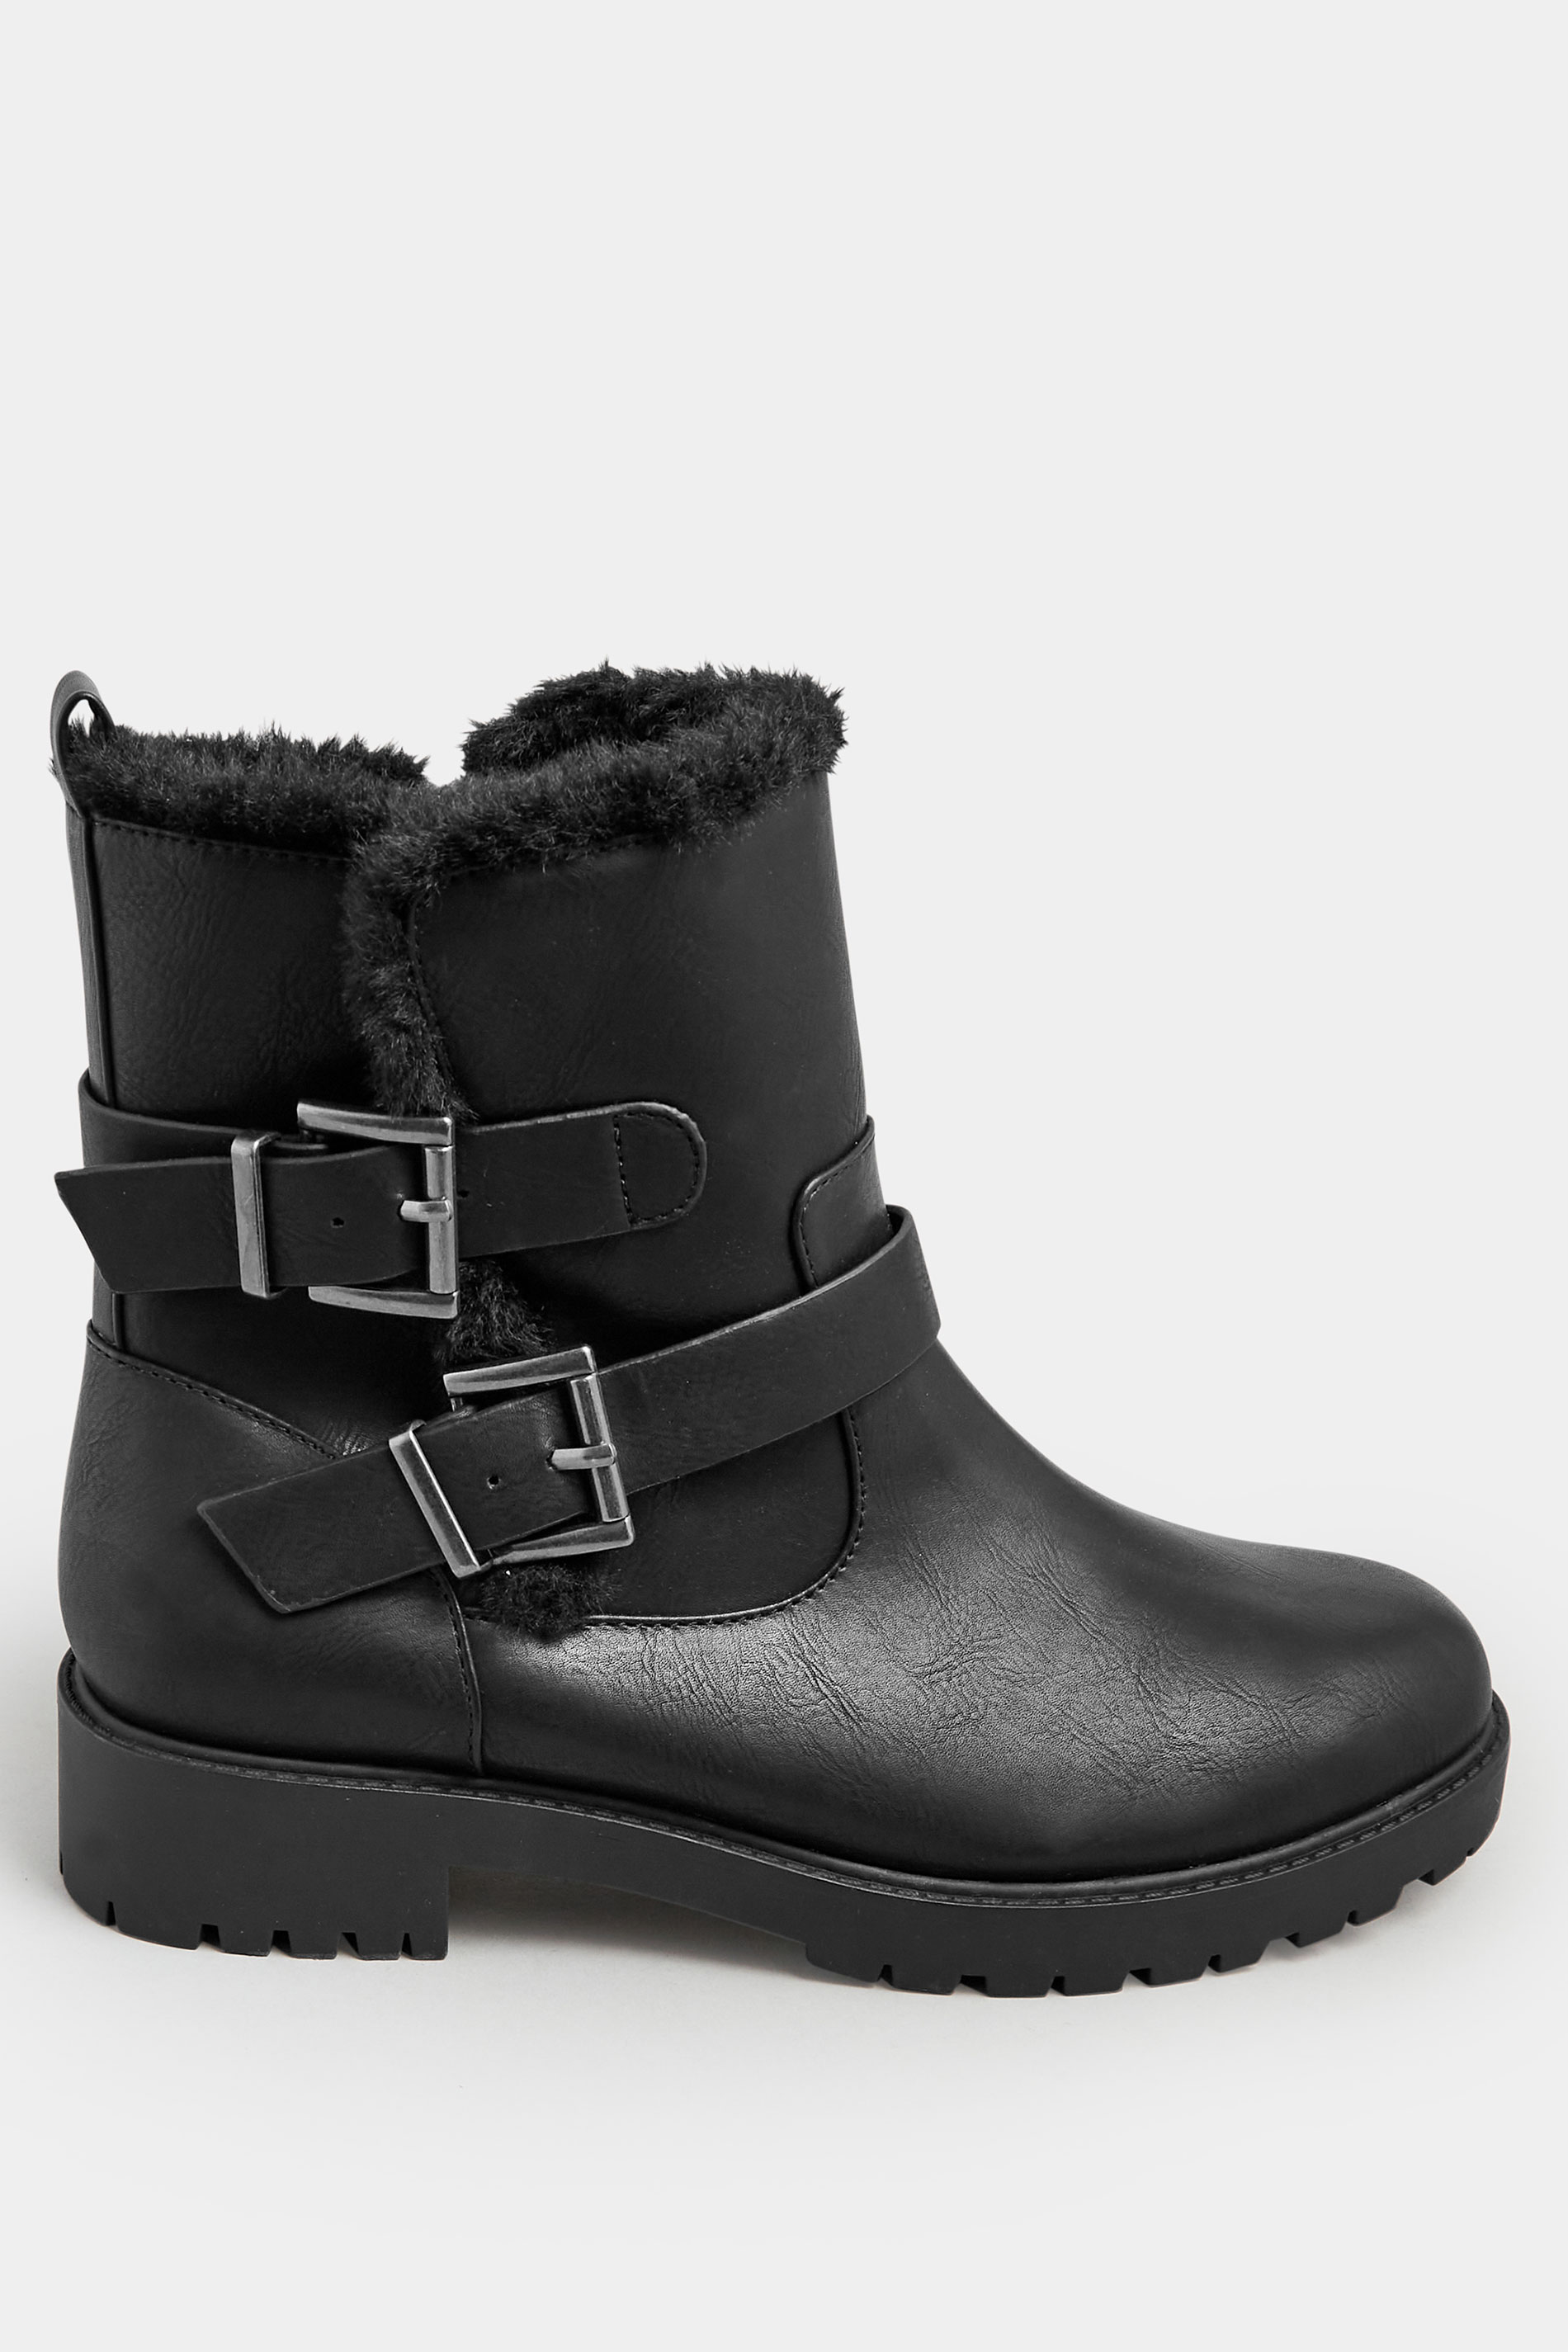 Black Faux Fur Lined Biker Boot In Wide E Fit & Extra Wide EEE Fit | Yours Clothing 3